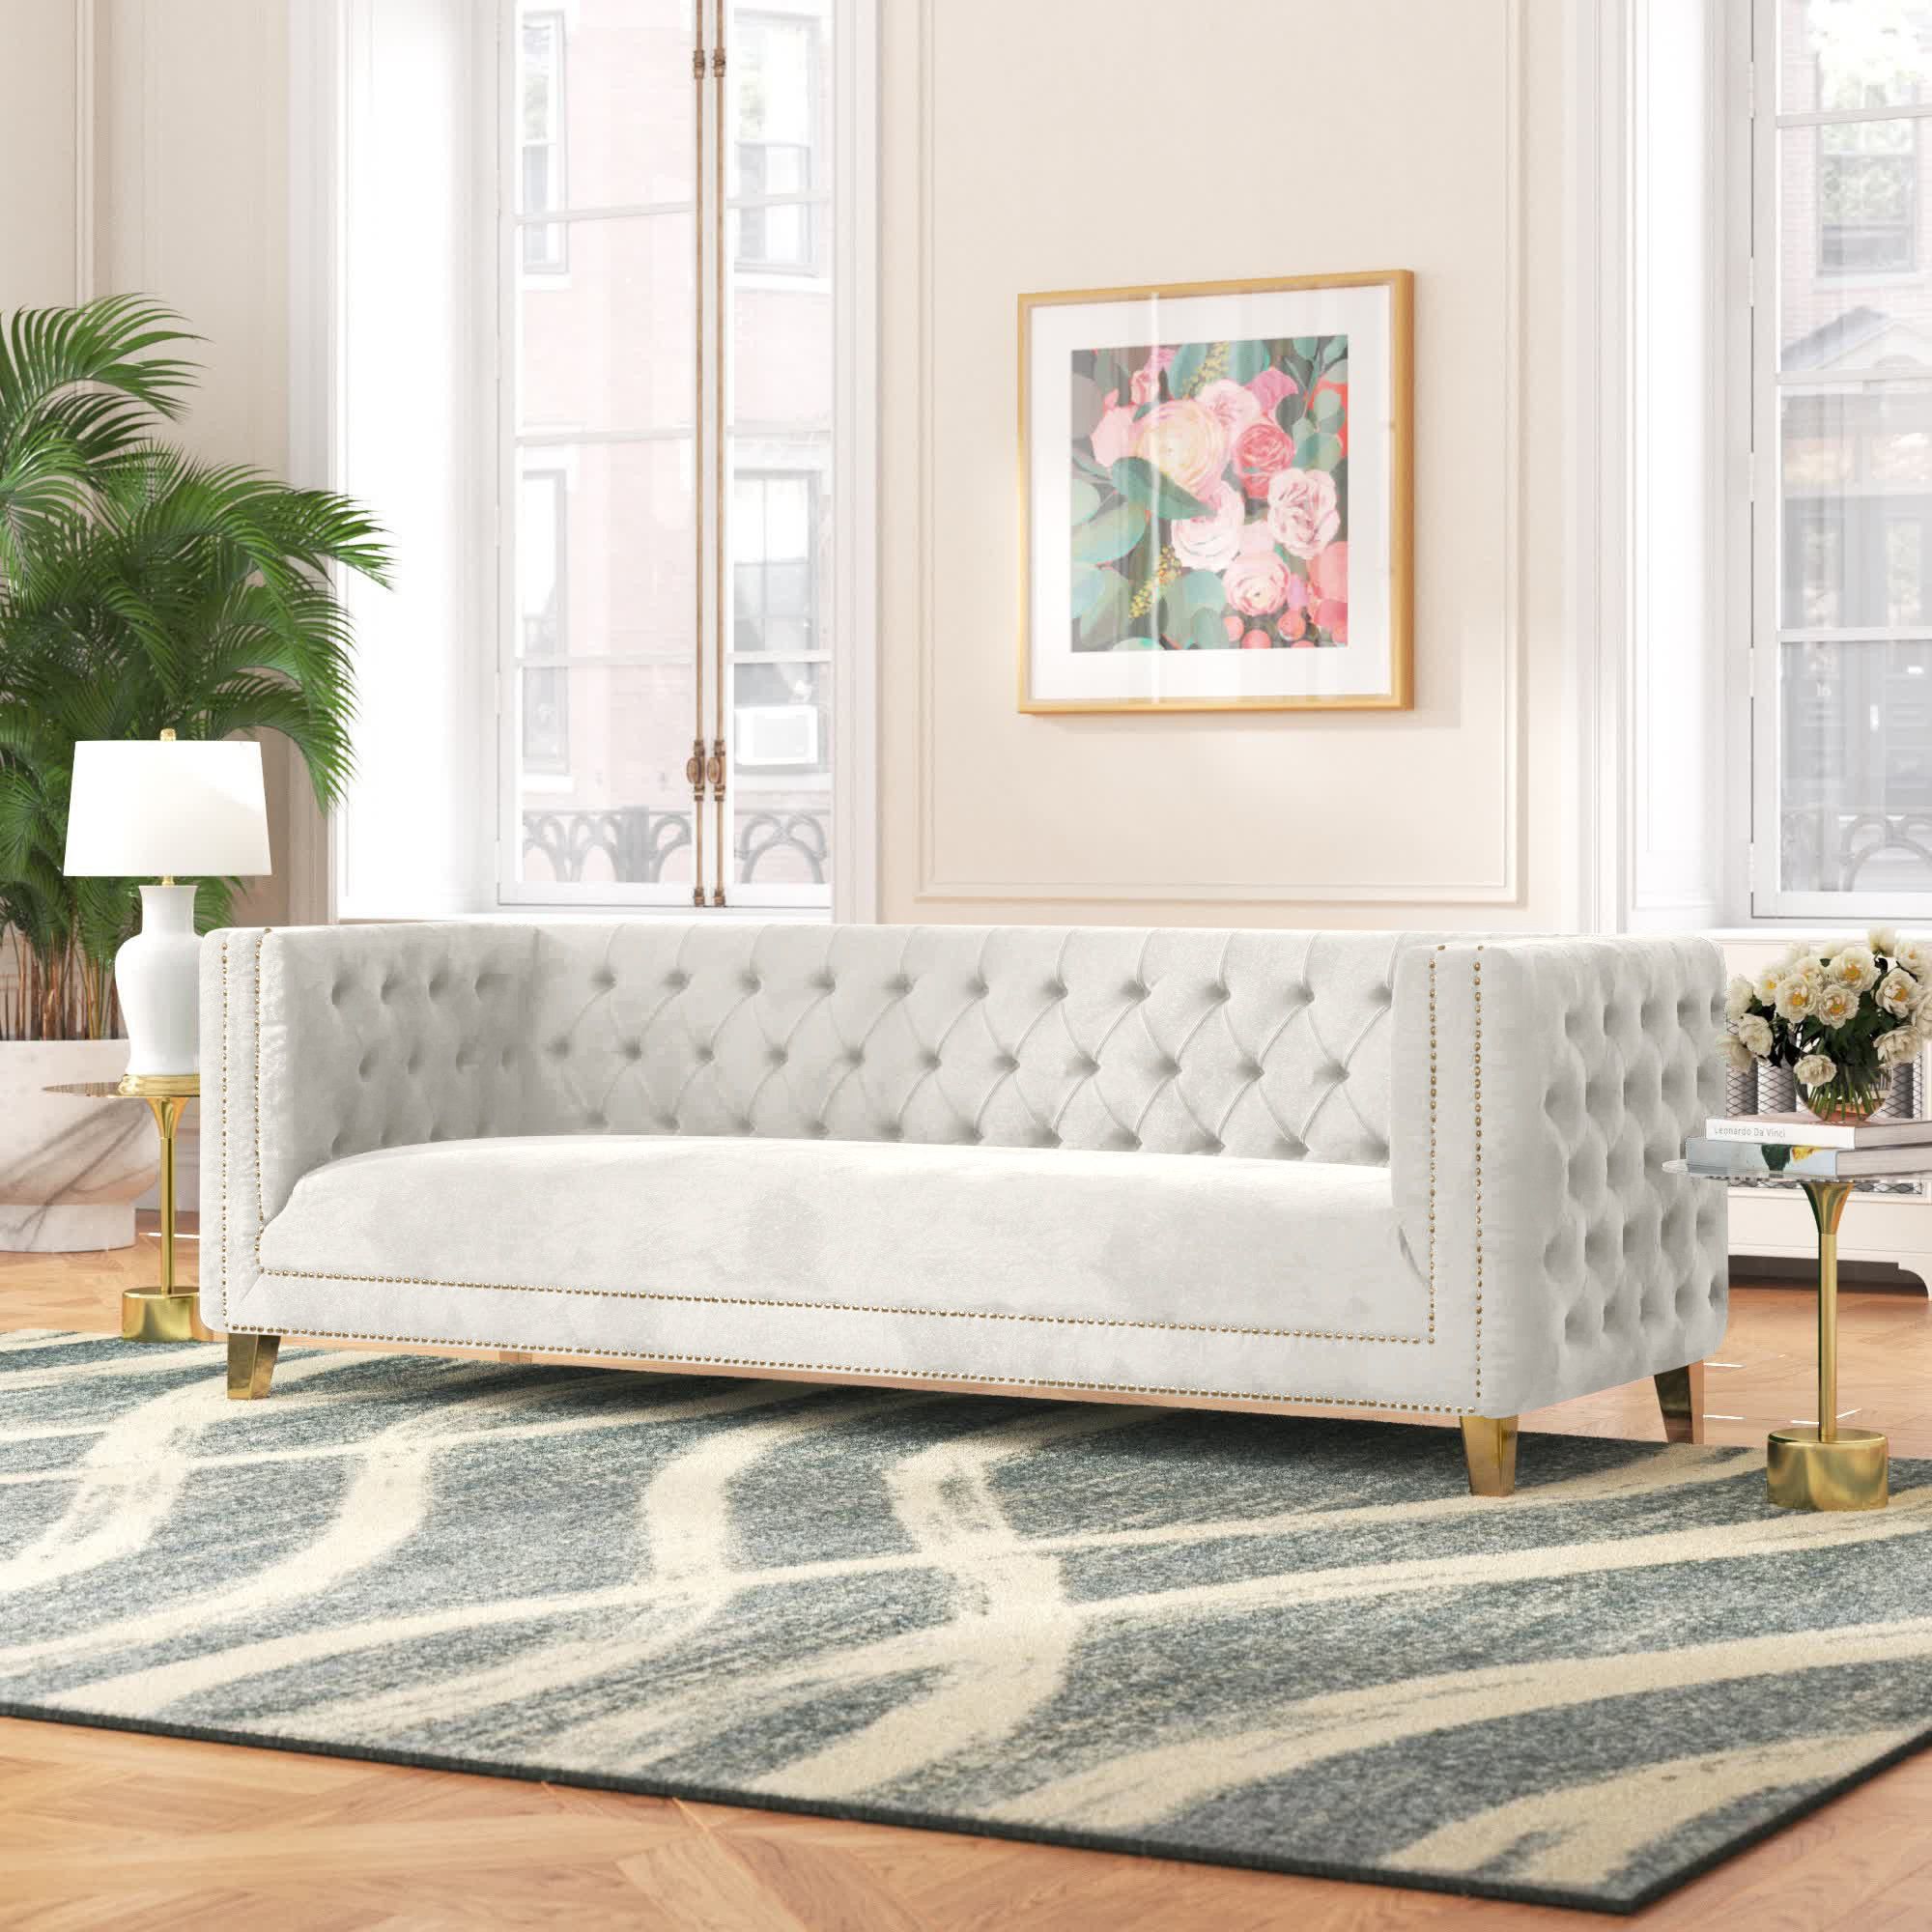 Willa Arlo Interiors Sickels 90'' Upholstered Sofa & Reviews | Wayfair Inside Tufted Upholstered Sofas (View 3 of 15)